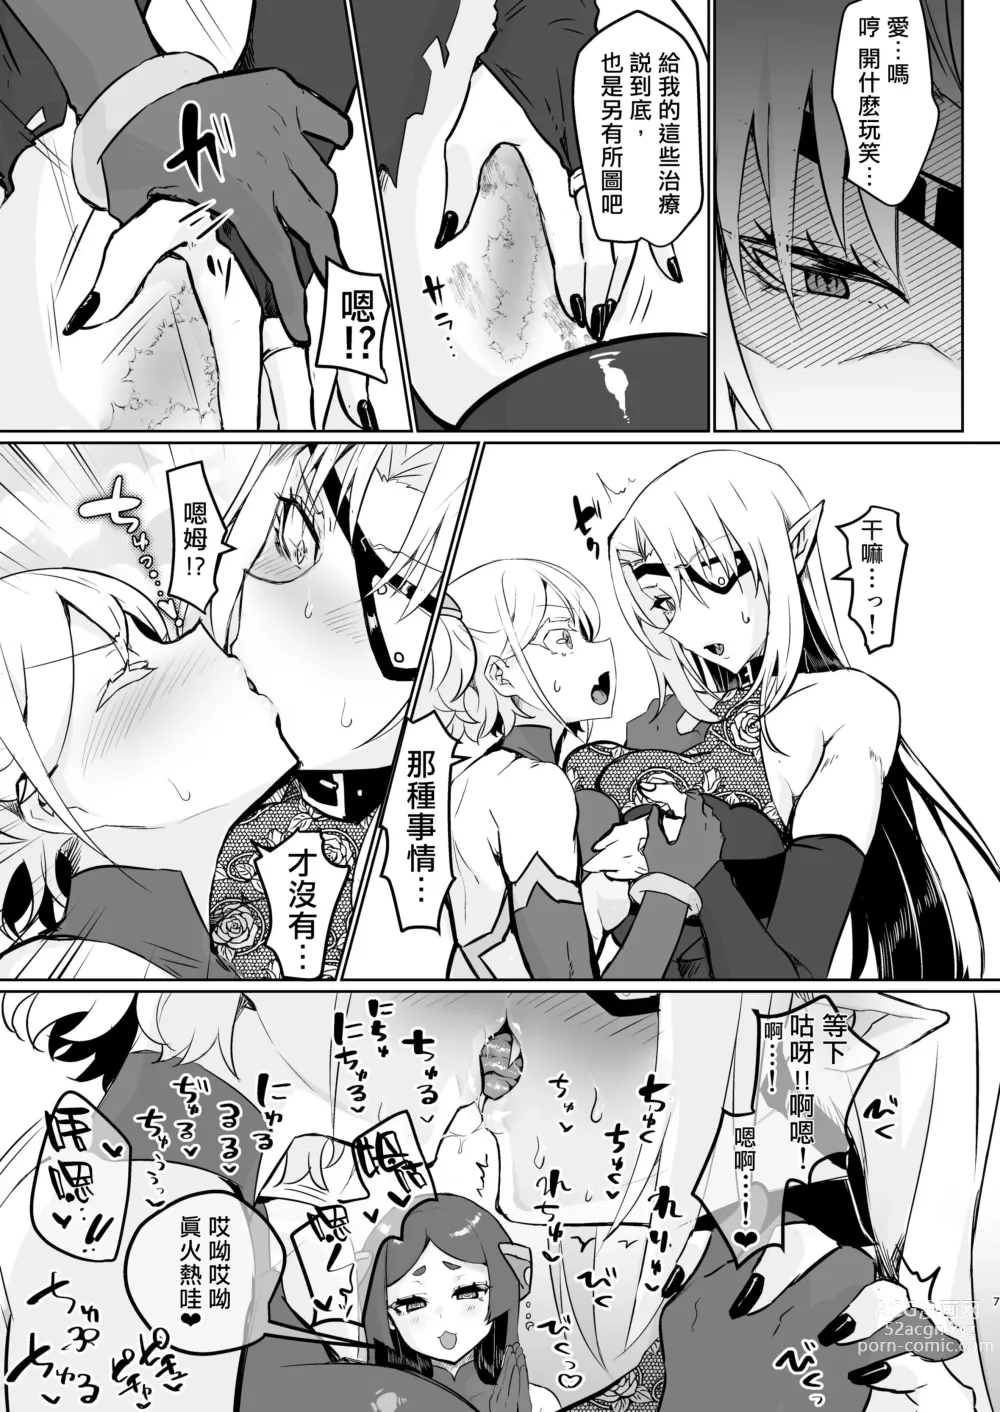 Page 7 of doujinshi 邪恶组织女干部正堕